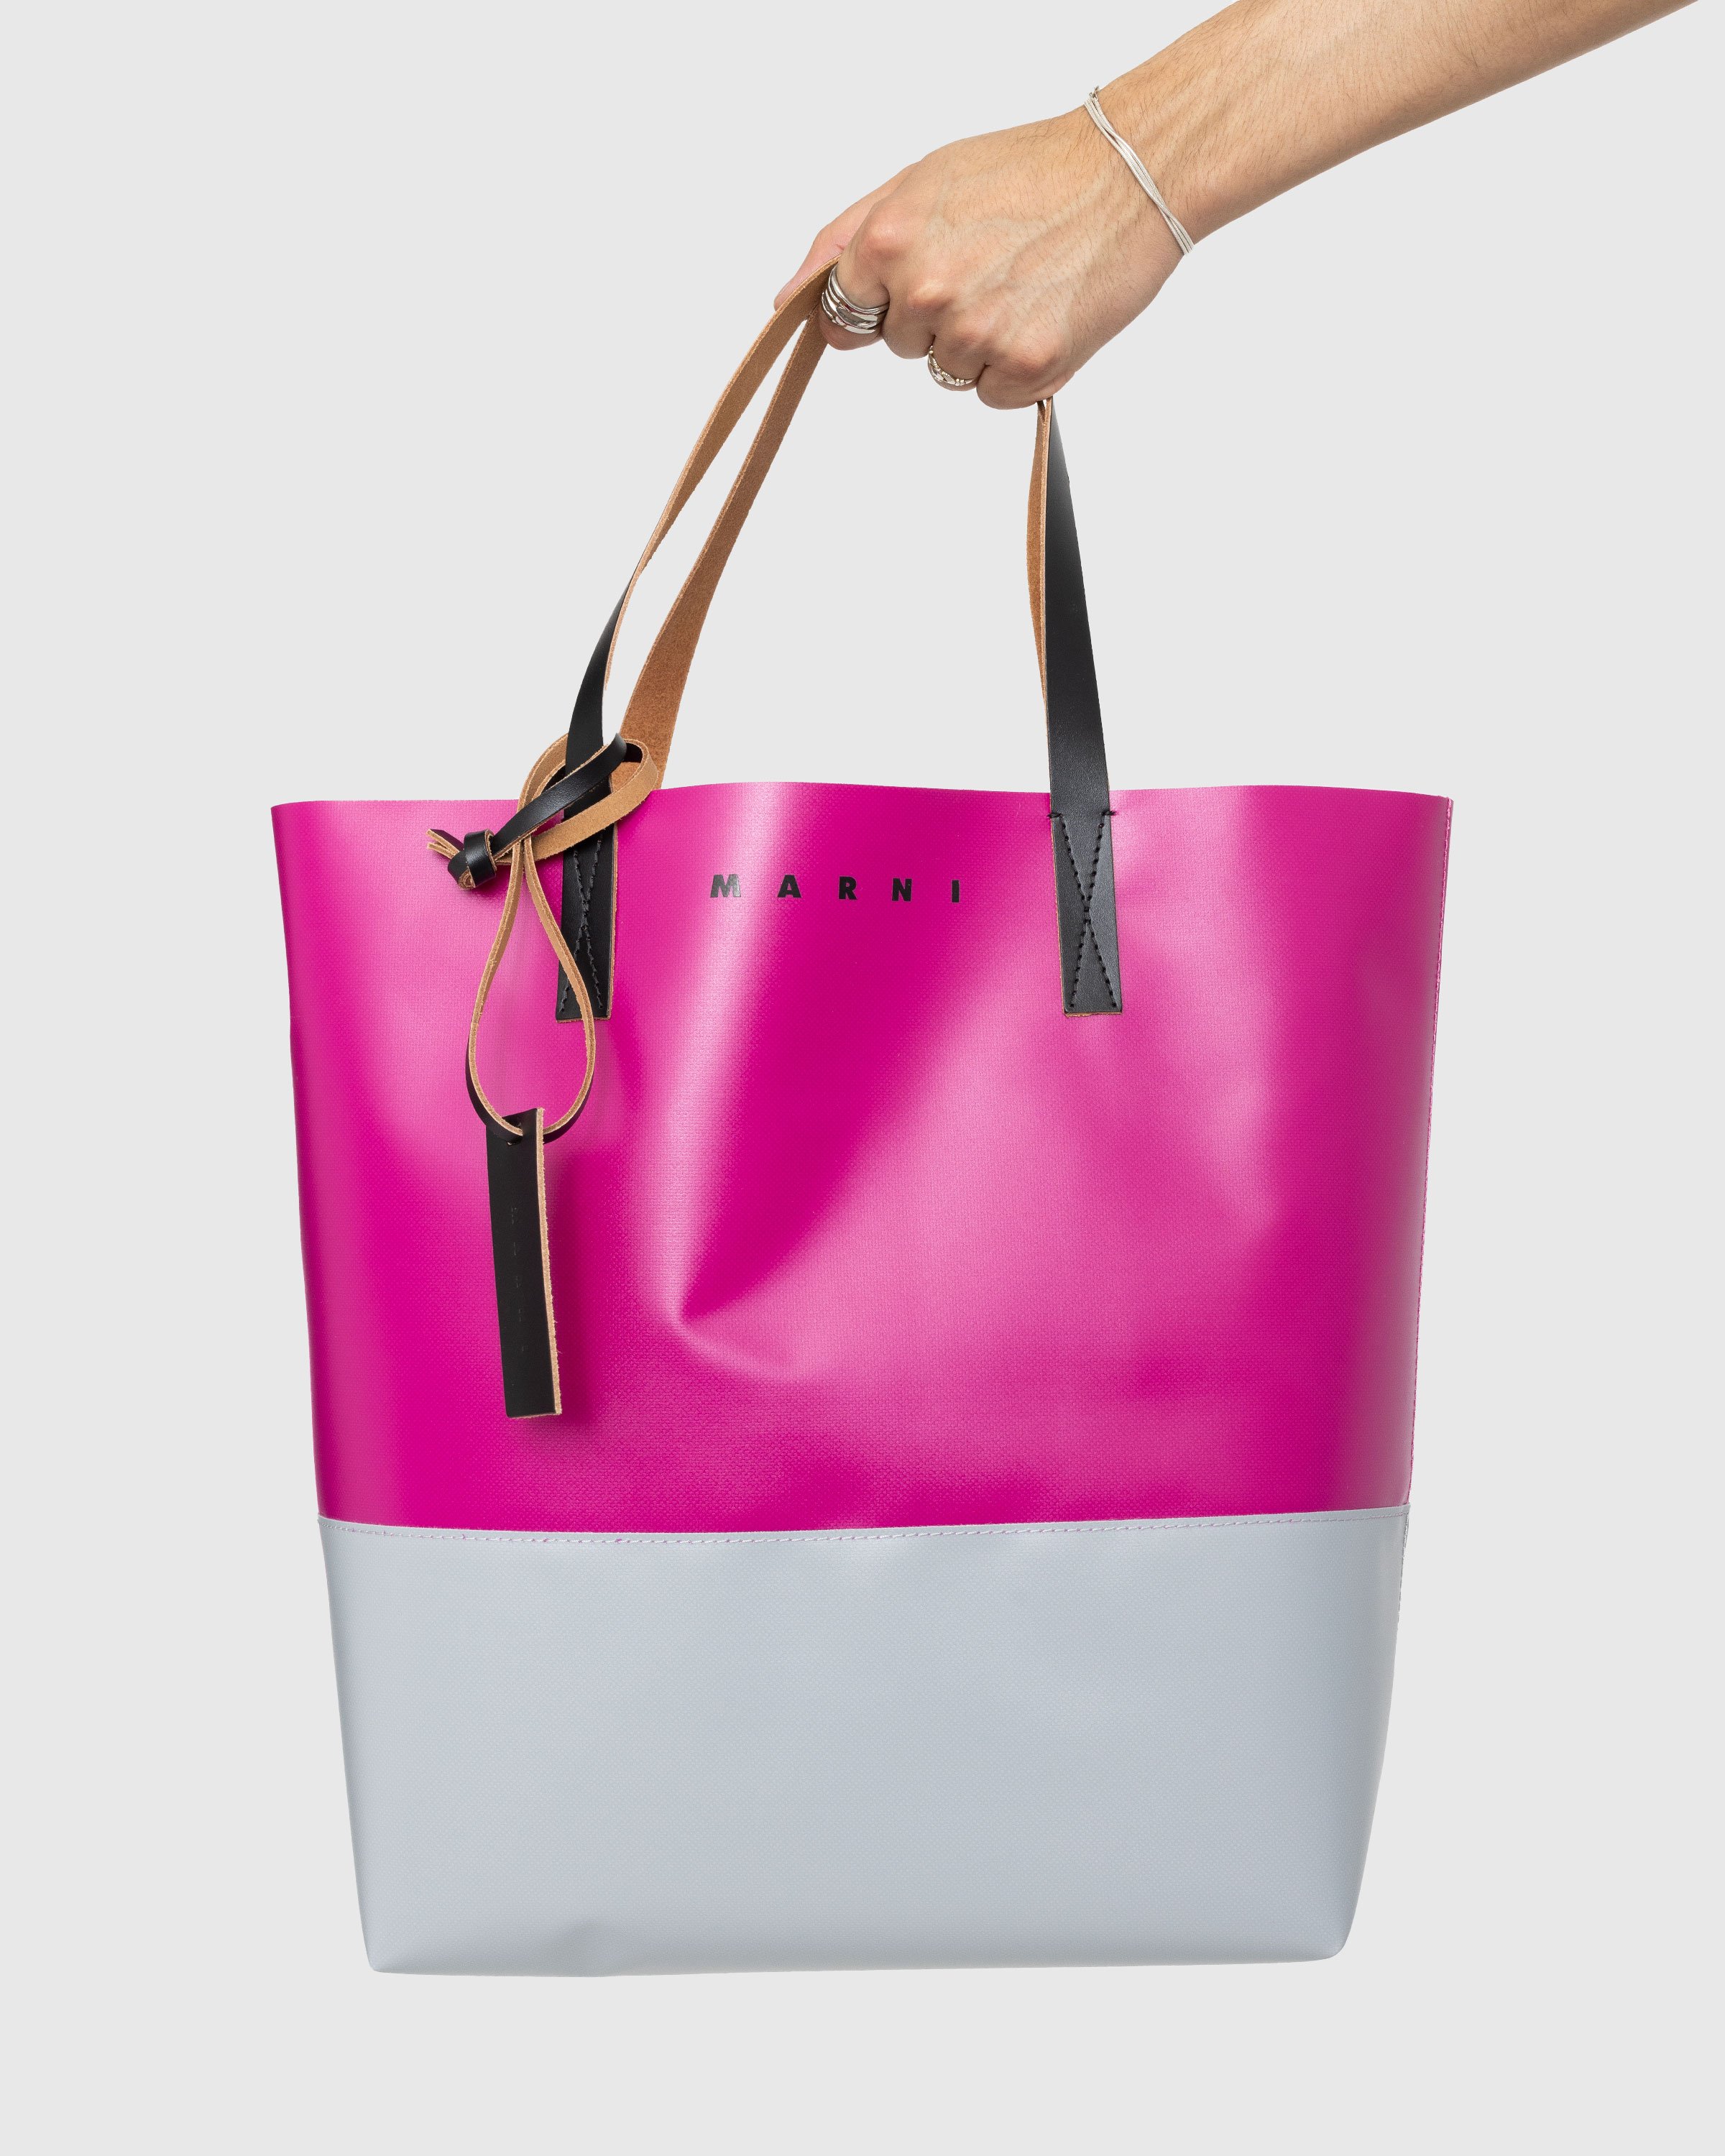 Marni - Tribeca Two-Tone Shopping Bag Pink/Grey - Accessories - Pink - Image 4